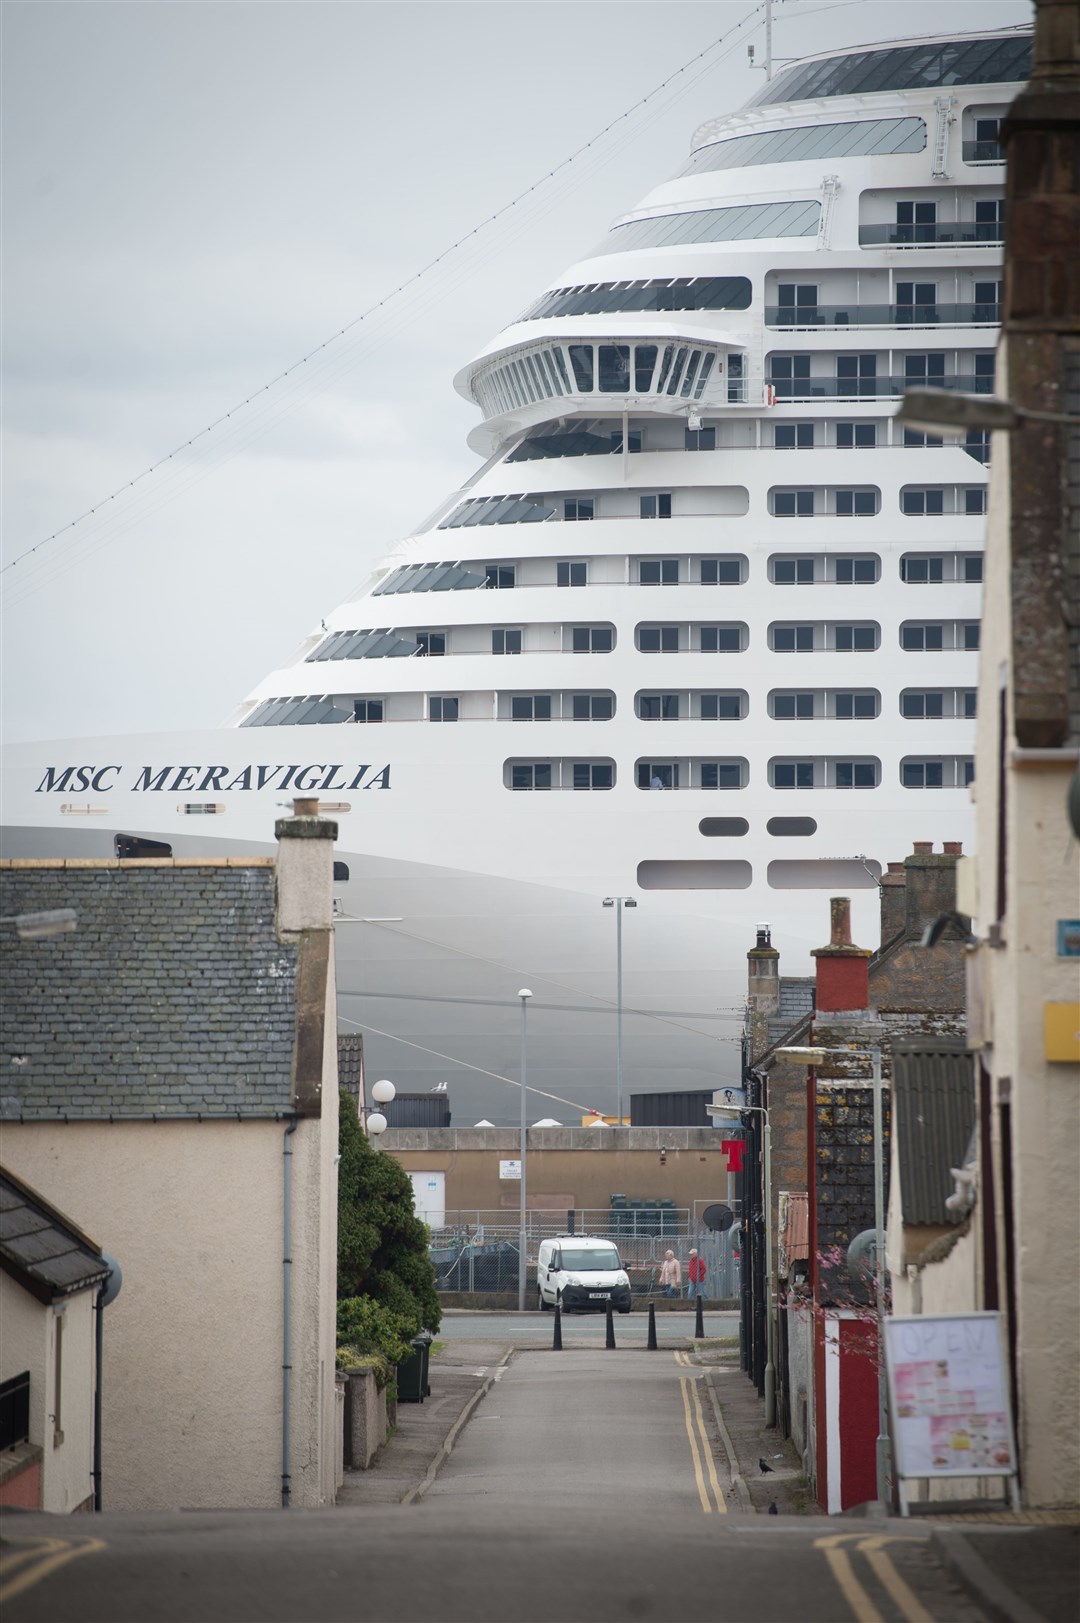 MSC Meraviglia, the biggest ever cruise liner to visit Scottish waters at that time, docked at Invergordon.Many of the hundreds of thousands of passengers alighting there take the train to head to Inverness and other points on the Far North Line. Picture: Callum Mackay.